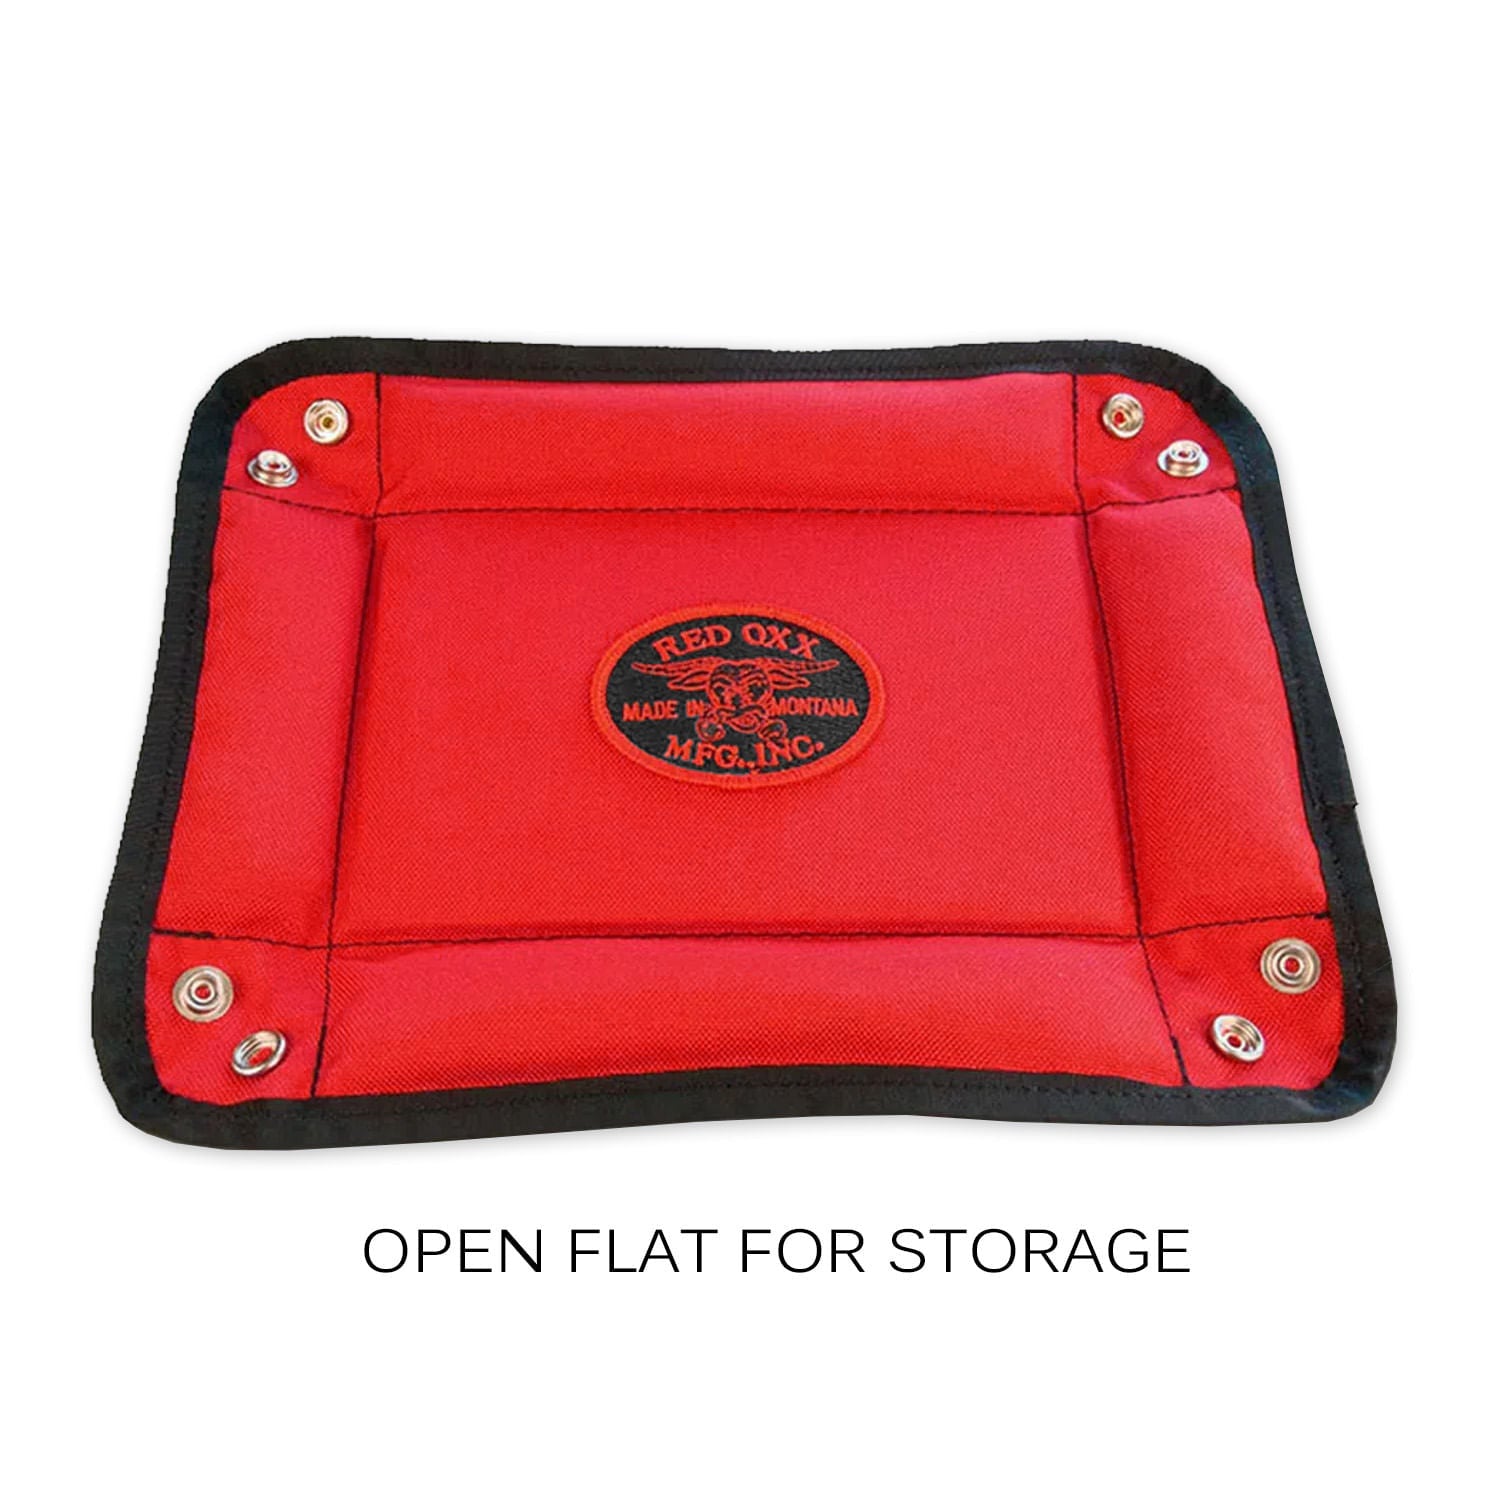 Open flat for storage